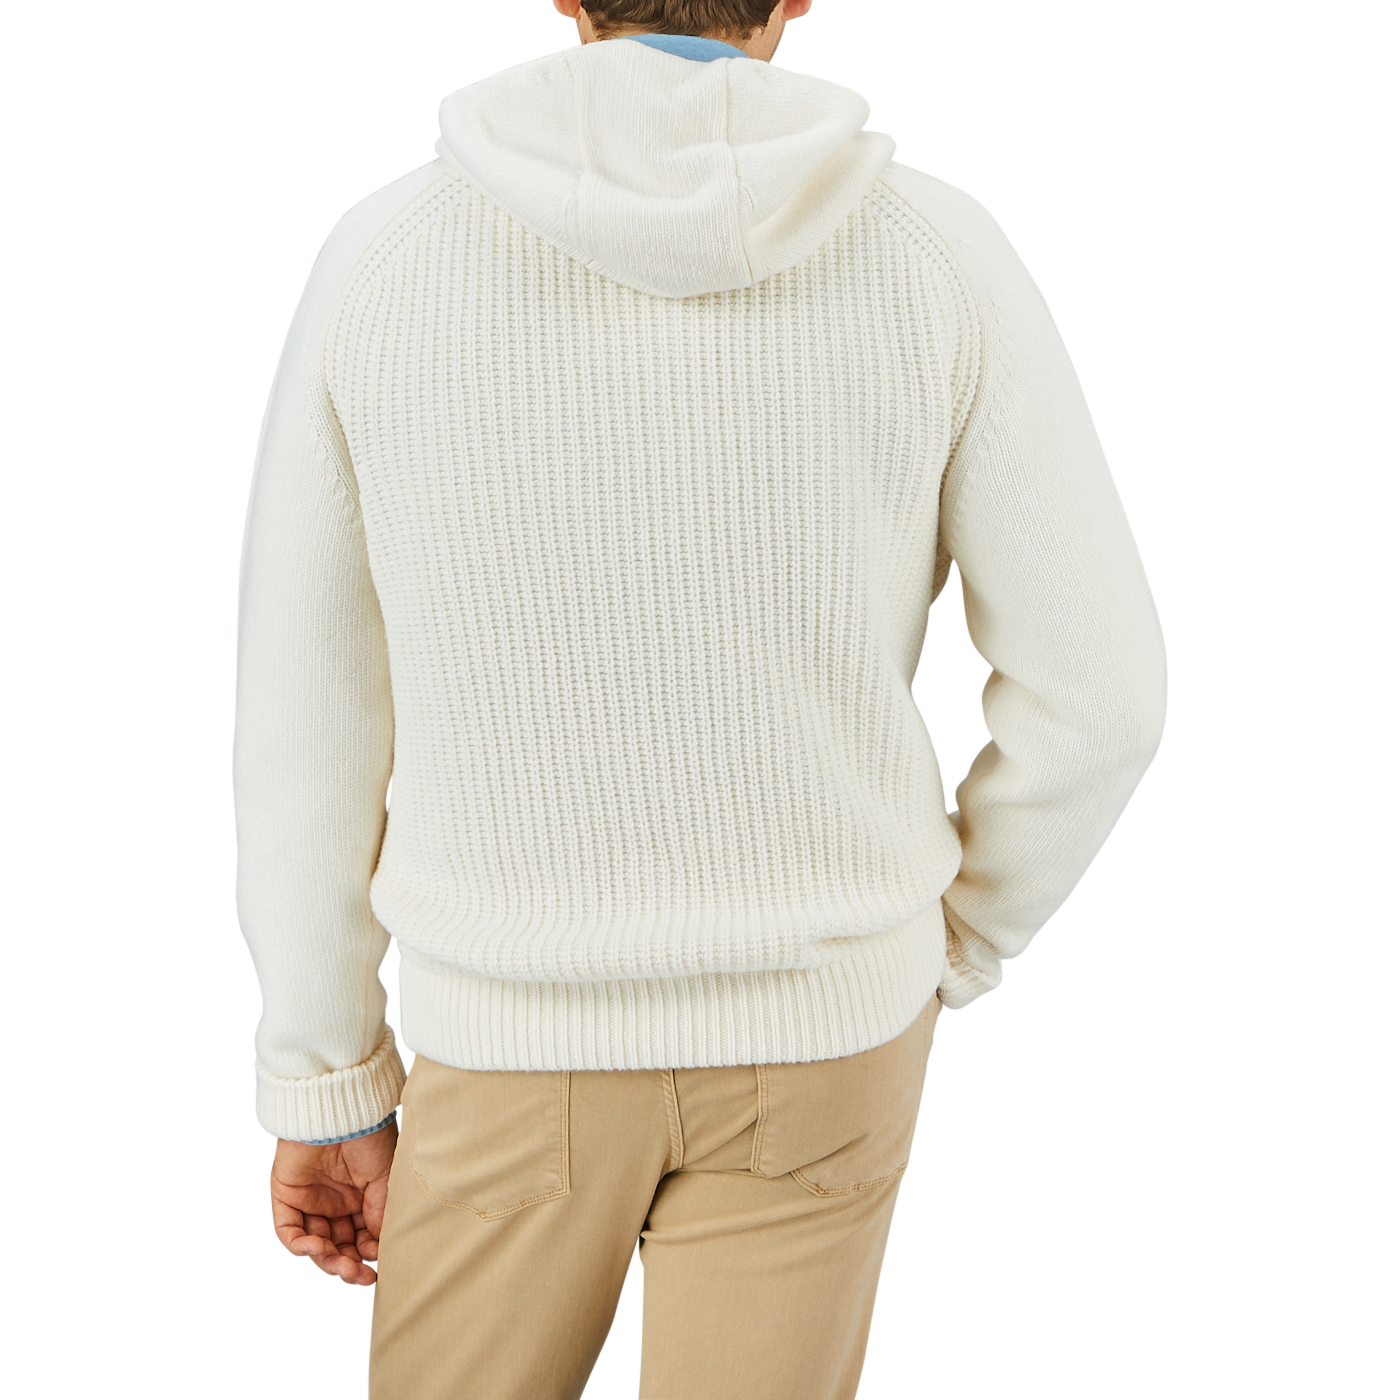 A person wearing a Herno Cream Wool Nylon Reversible Knitted Jacket and tan pants is standing facing away from the camera against a plain background.